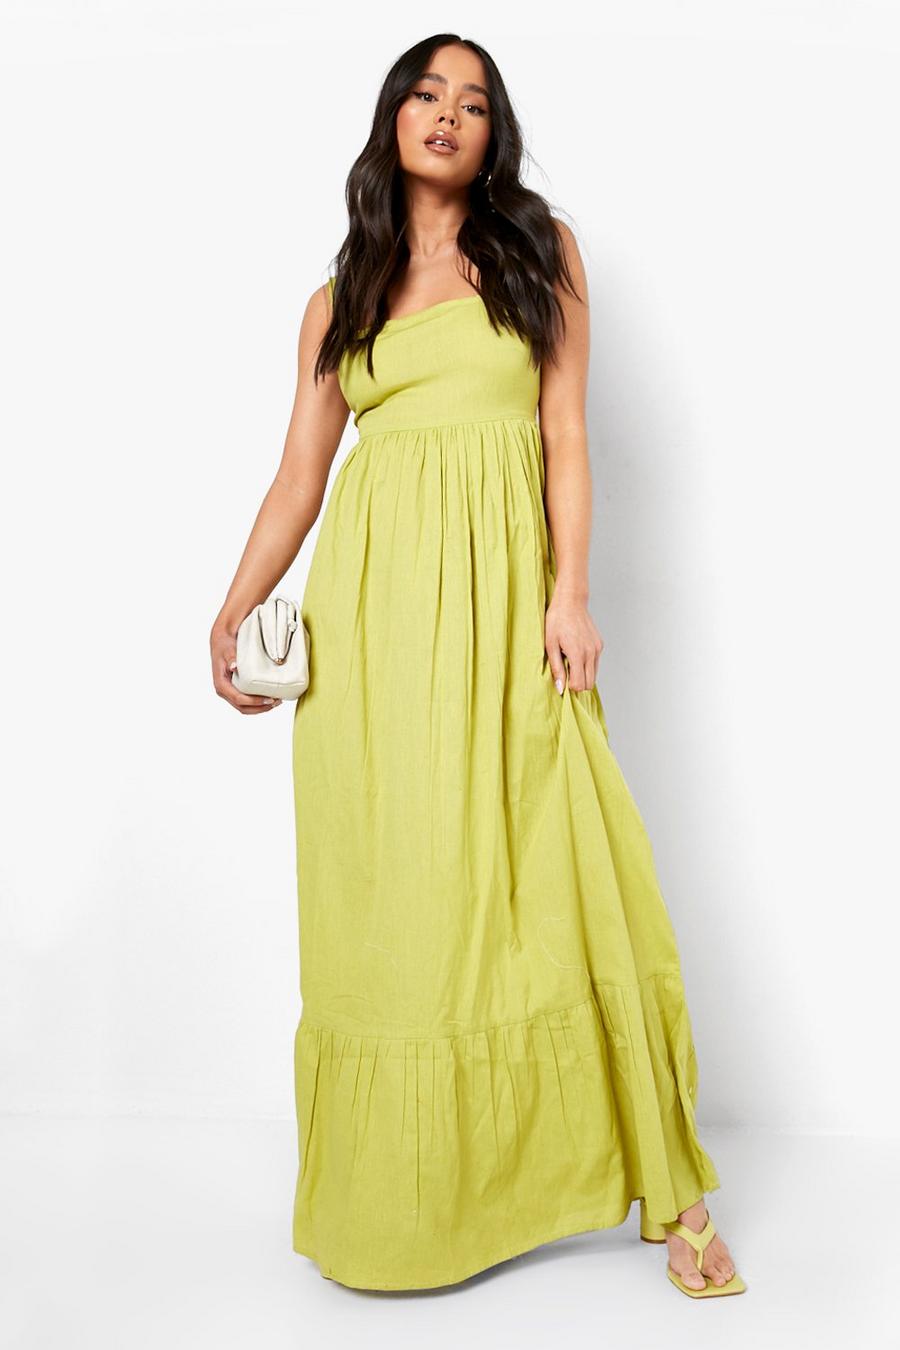 Chartreuse yellow Petite Linen Look Square Neck Tie Back Maxi Dress